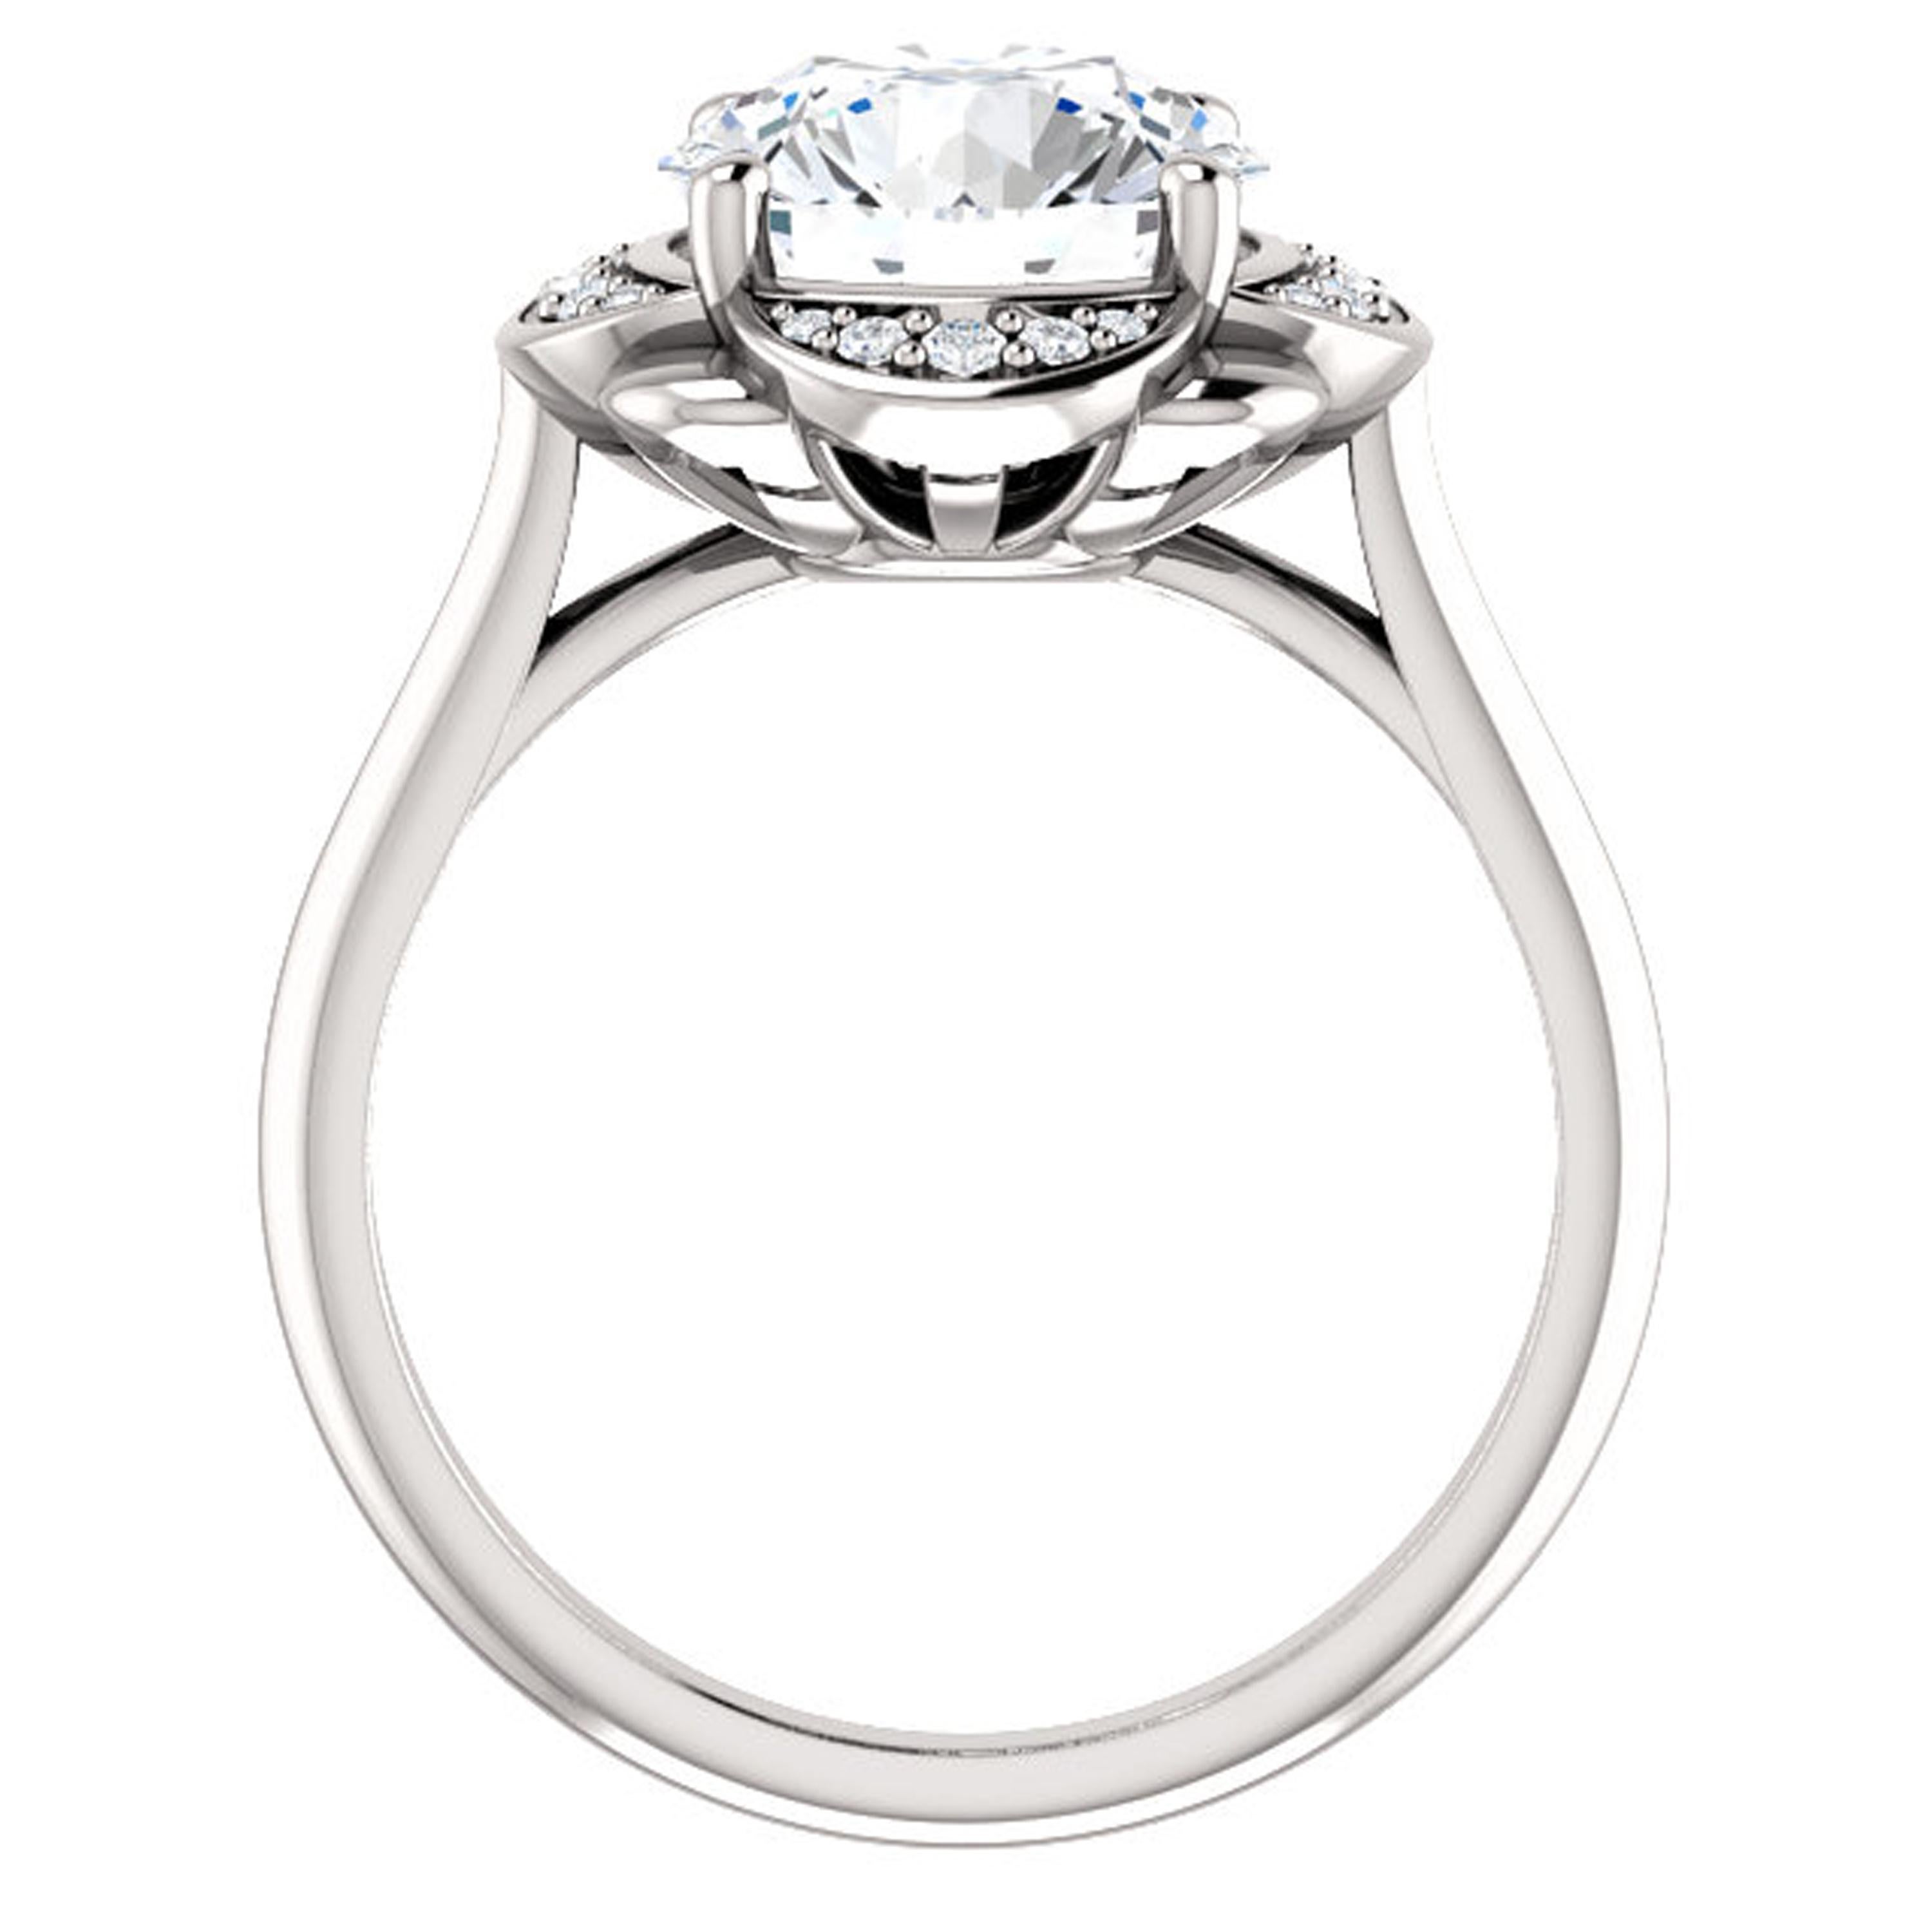 Amplifying the GIA certified center stone, shimmering white diamonds surround the scalloped halo of this engagement ring. Handcrafted in 14k white gold, this wedding ring has a breathtaking brilliance and luxury with a high polished finish.

Style